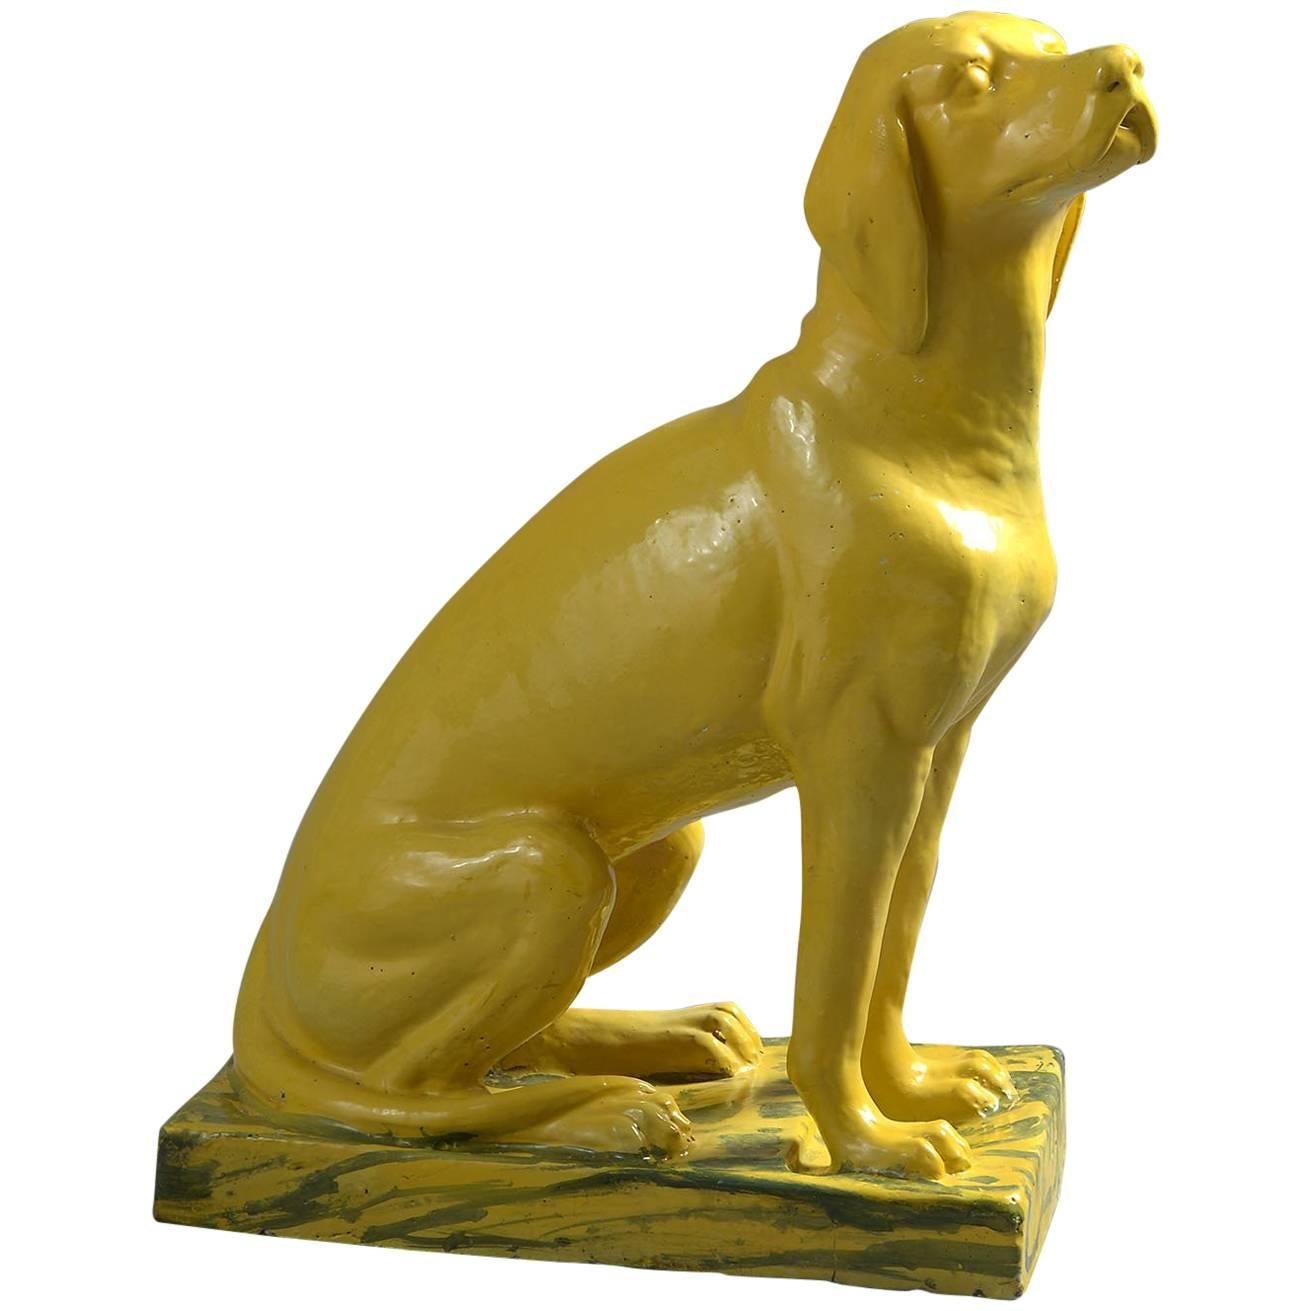 Lifesize Ceramic Statue of a Pointer Dog For Sale